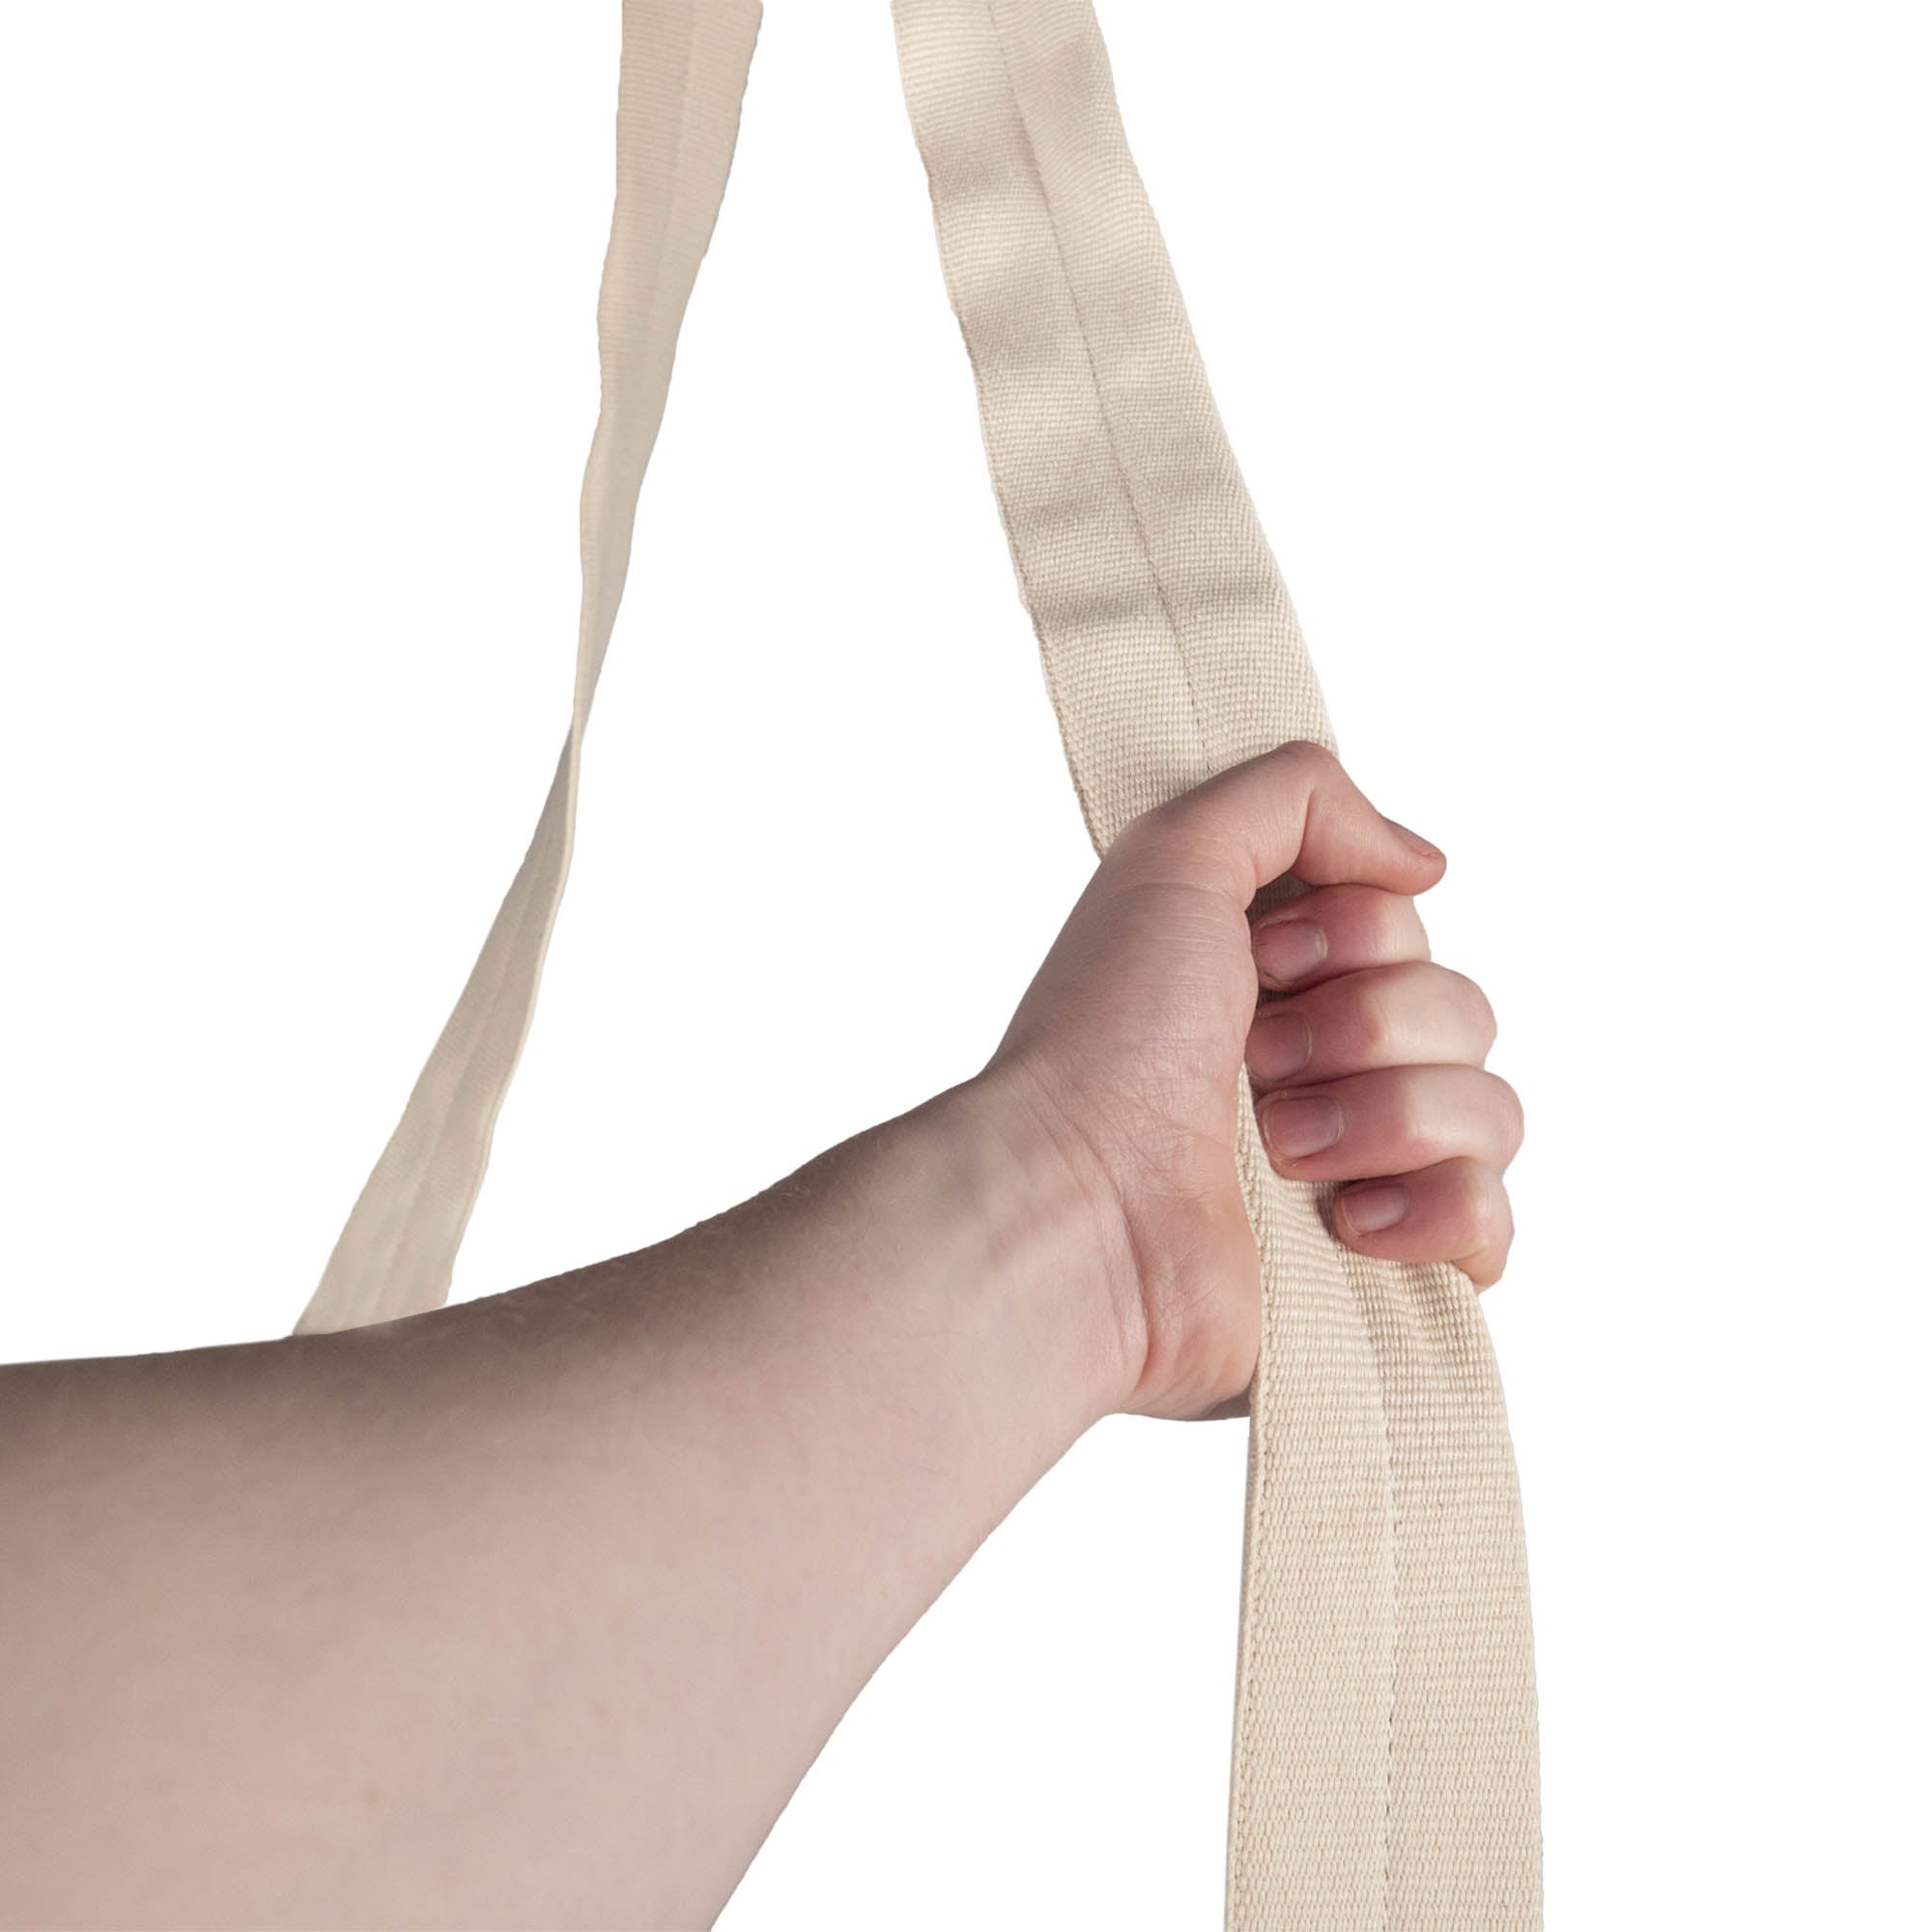 Prodigy cotton covered aerial loop in hand